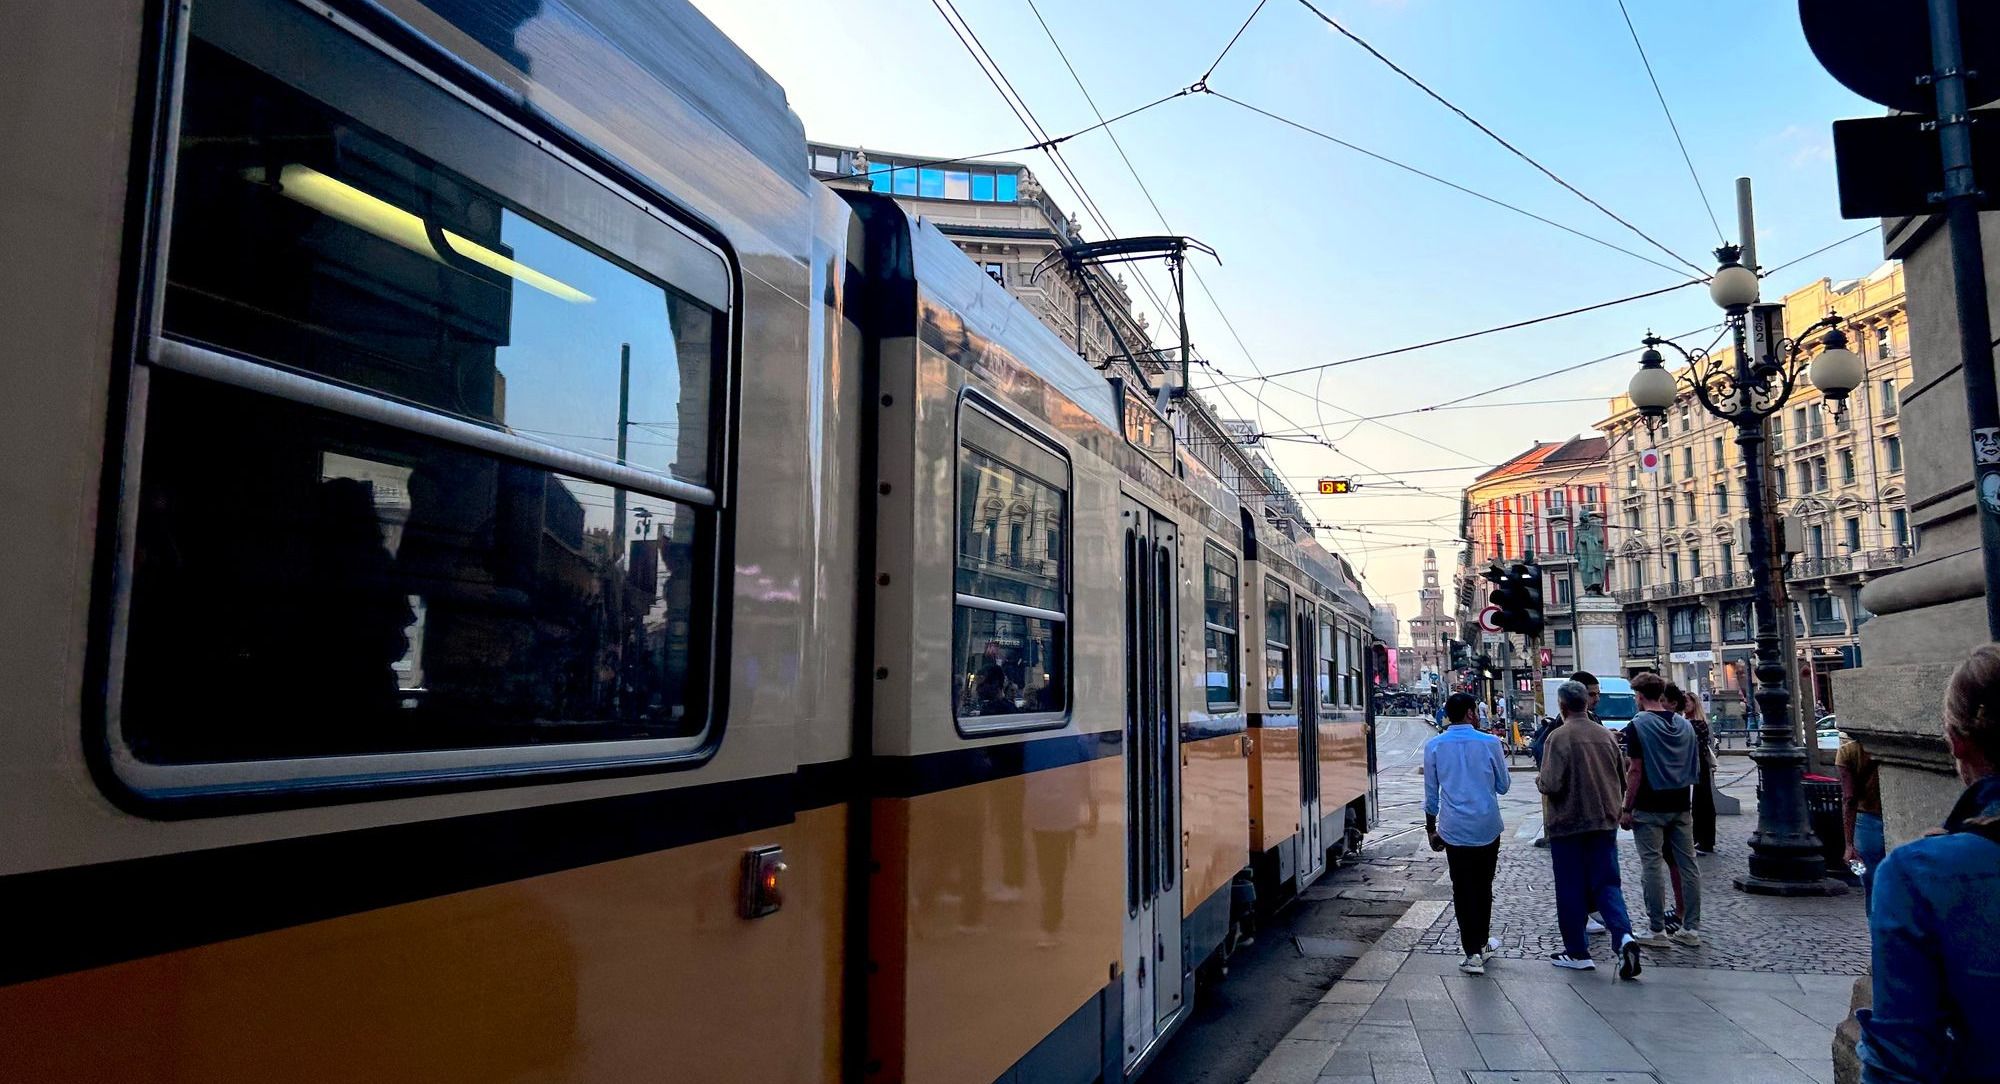 scenic picture of a tram in Milan in the middle of the city